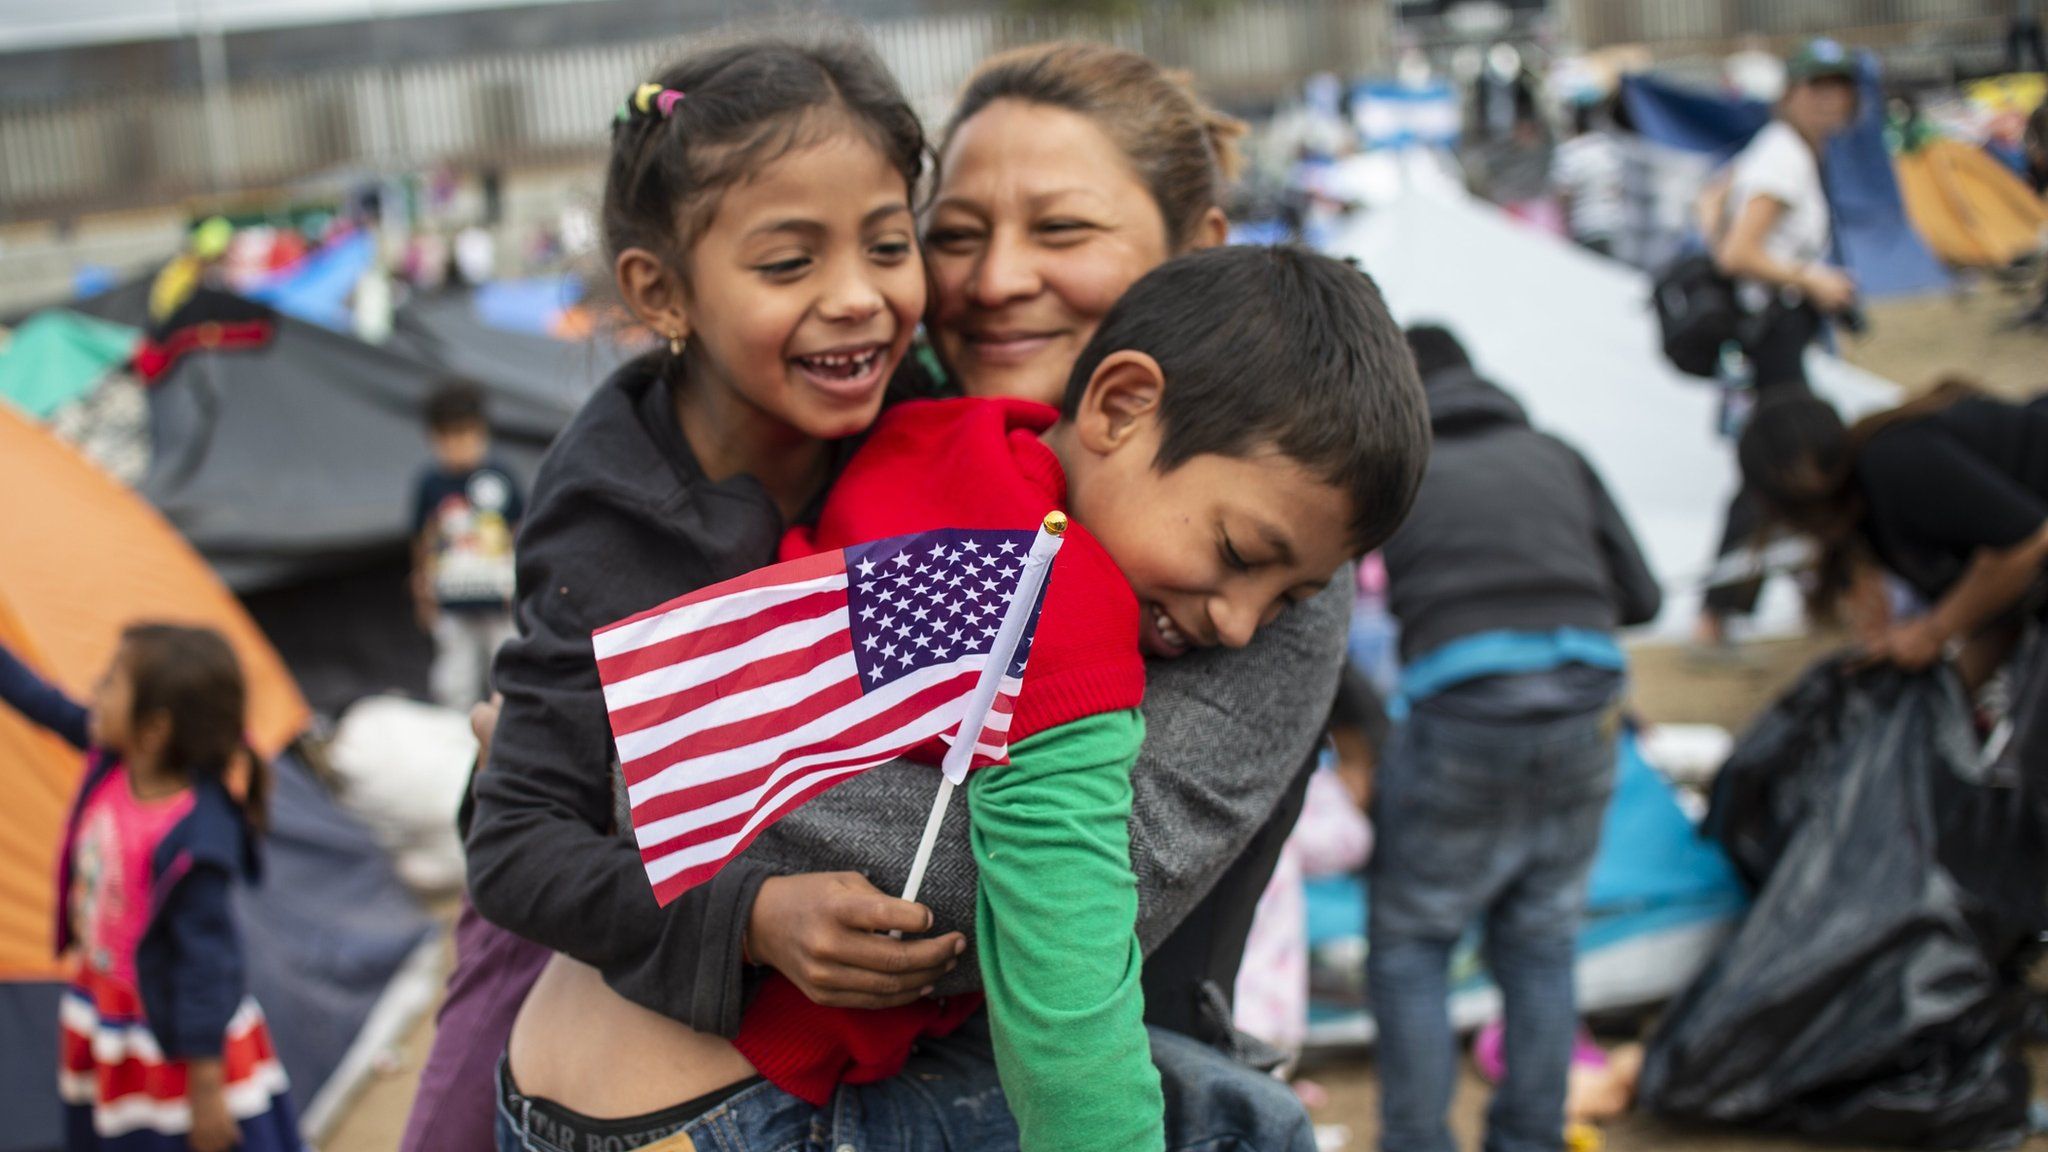 entral American migrants -mostly from Honduras- wanting to reach the United States in hope of a better life, remains at a shelter in Tijuana, Baja California State, Mexico